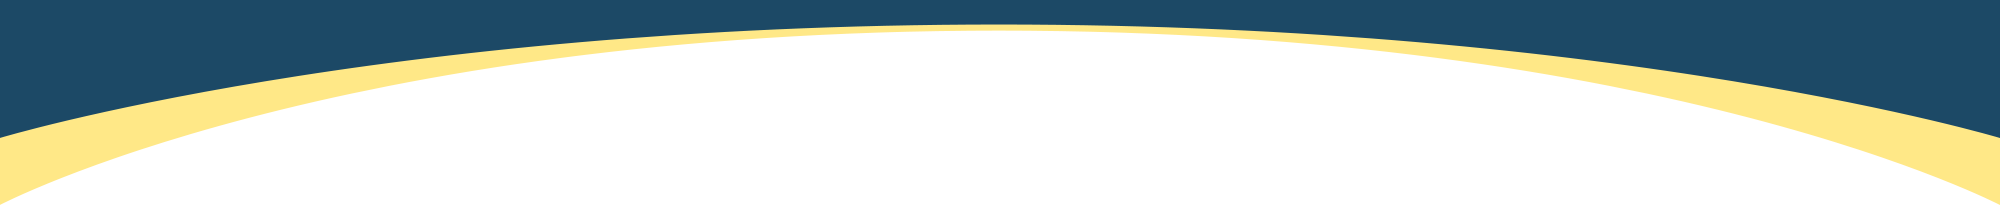 Dark blue and yellow downward curve section ending graphic